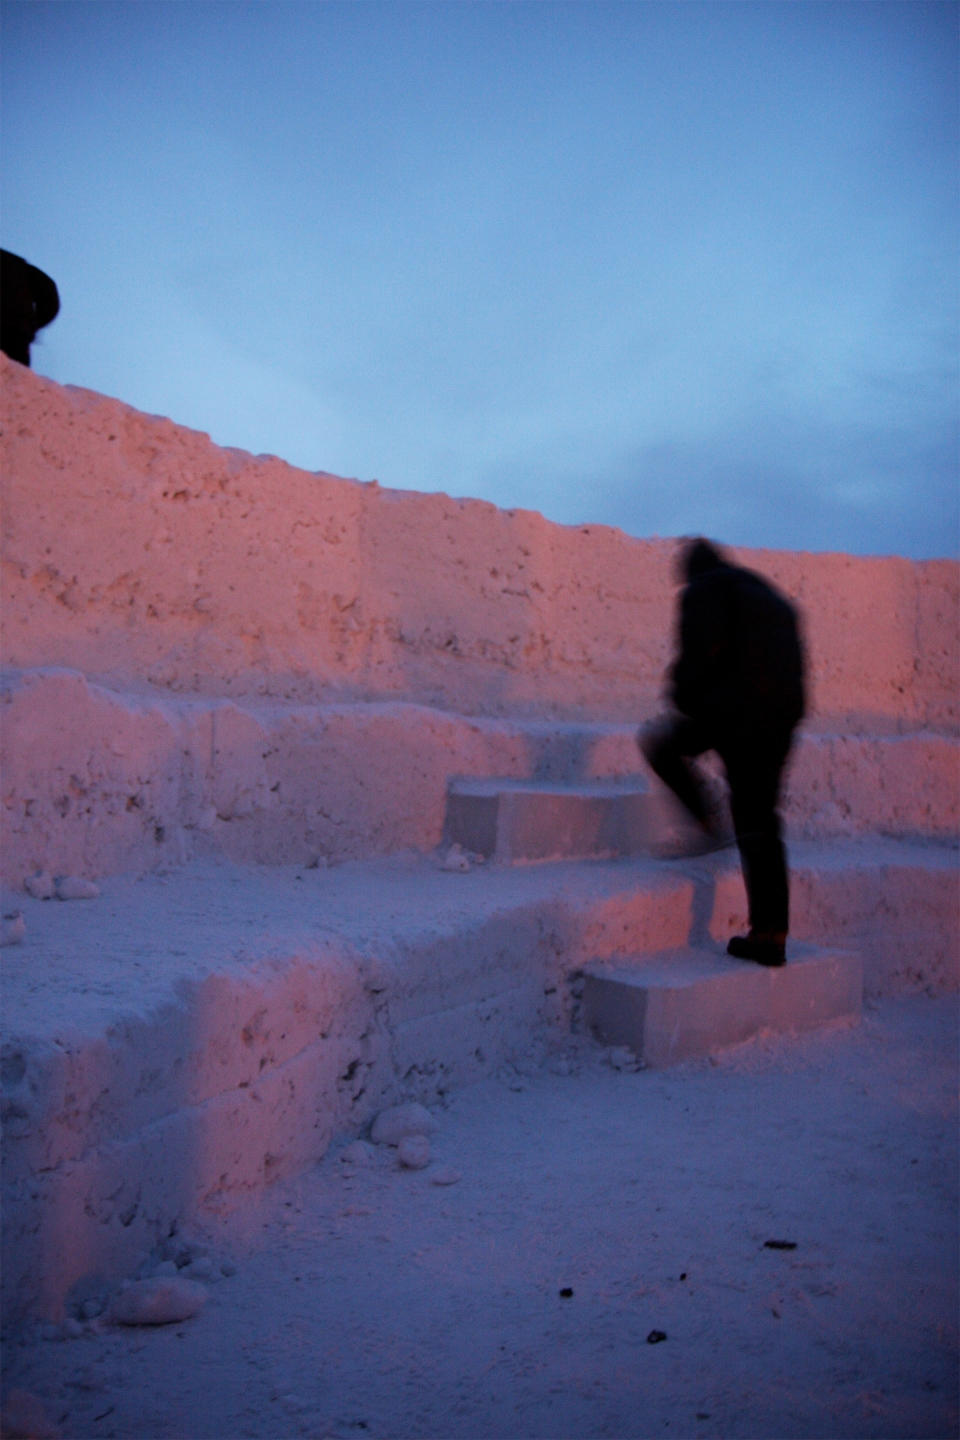 stacked firewood rests beside an opening between towering walls of snow. northern sky circle was an architectural, snow and ice maze installation in Alaska designed by Stephanie Forsythe + Todd MacAllen, in collaboration with sound artist Ethan Rose.